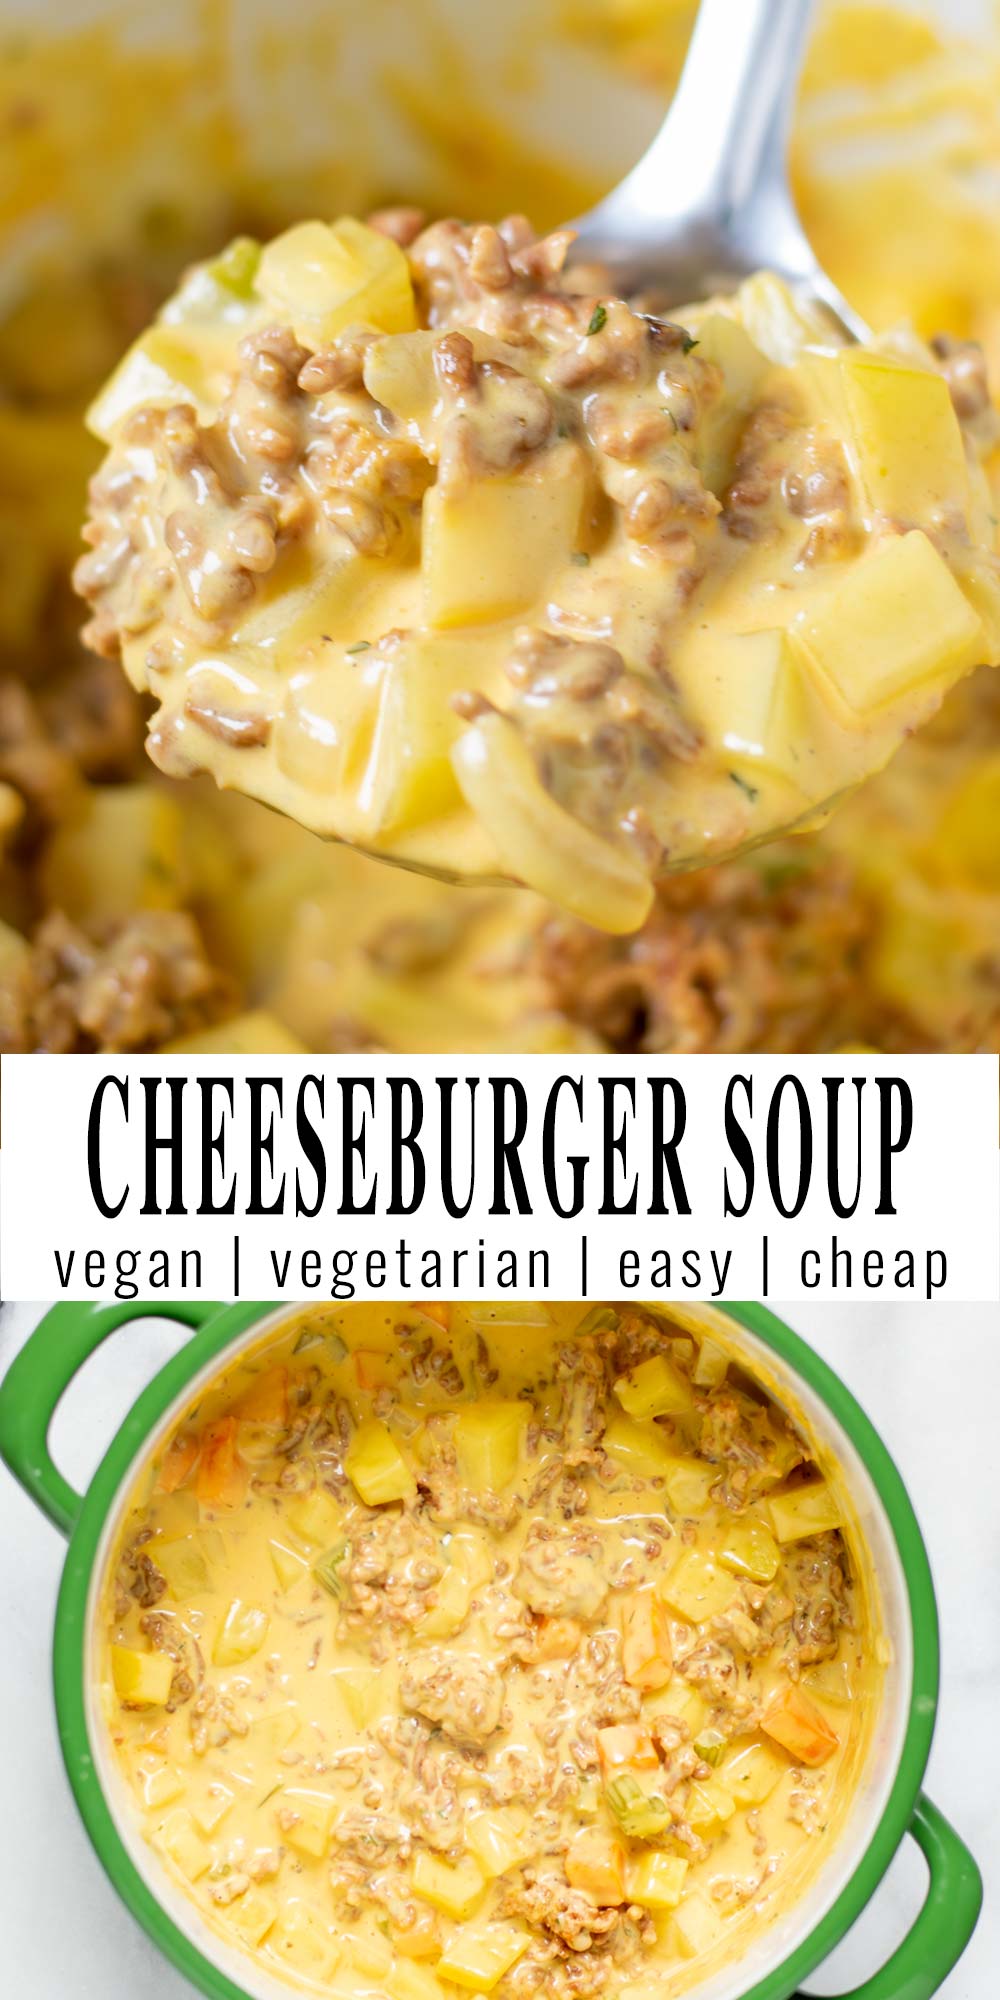 Collage of two pictures of the Cheeseburger Soup with recipe title text.